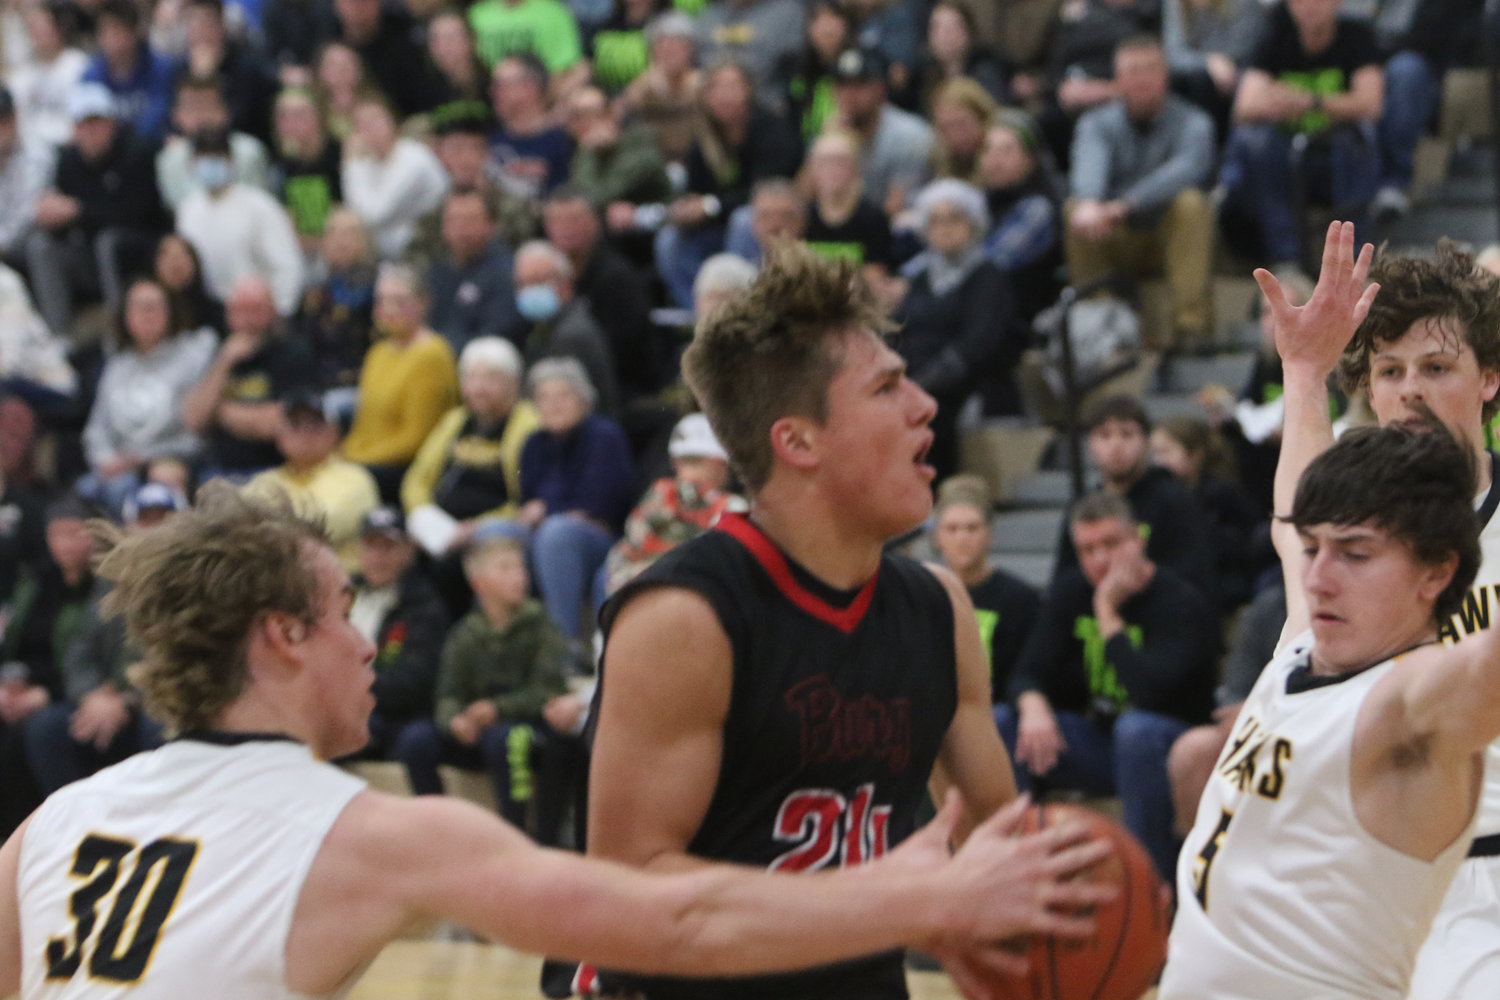 Williamsburg sophomore forward Derek Weisskopf charges toward the hoop against Mid-Prairie's Will Cavanagh, but he was called for an offensive foul.